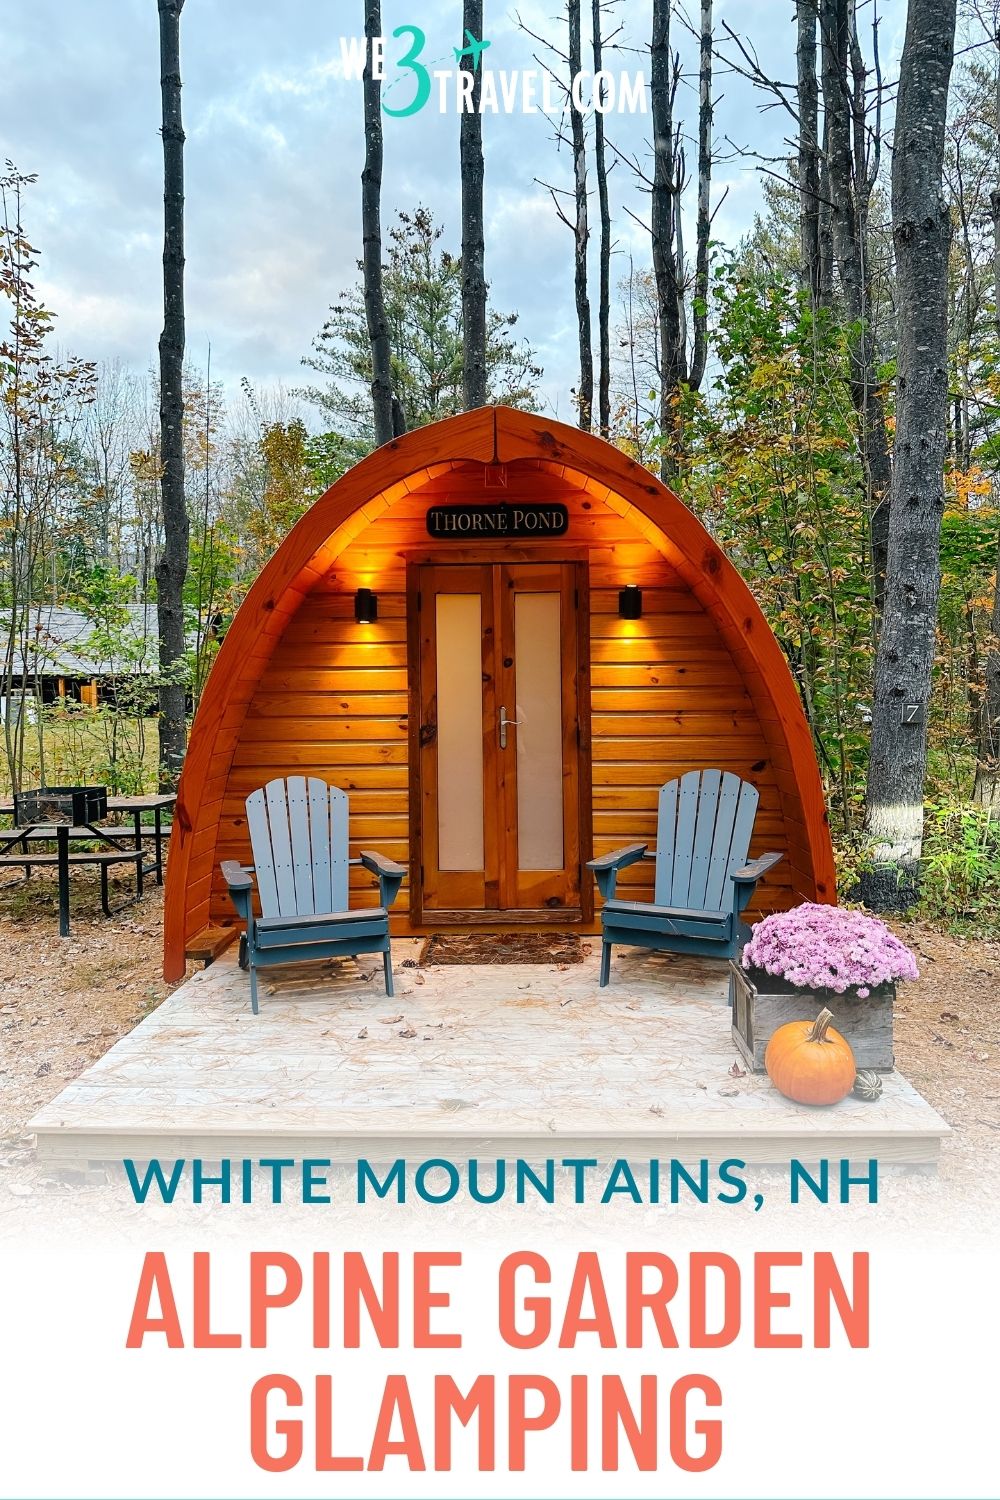 Looking for a unique and unforgettable glamping experience? Look no further than Alpine Garden Glamping in the White Mountains of New Hampshire. With a variety of luxury accommodations to choose from, including cabins, glamping huts, a treehouse, and a retro trailer, Alpine Garden has the perfect place for you to relax and reconnect with nature. Click here to start planning your glamping getaway today!